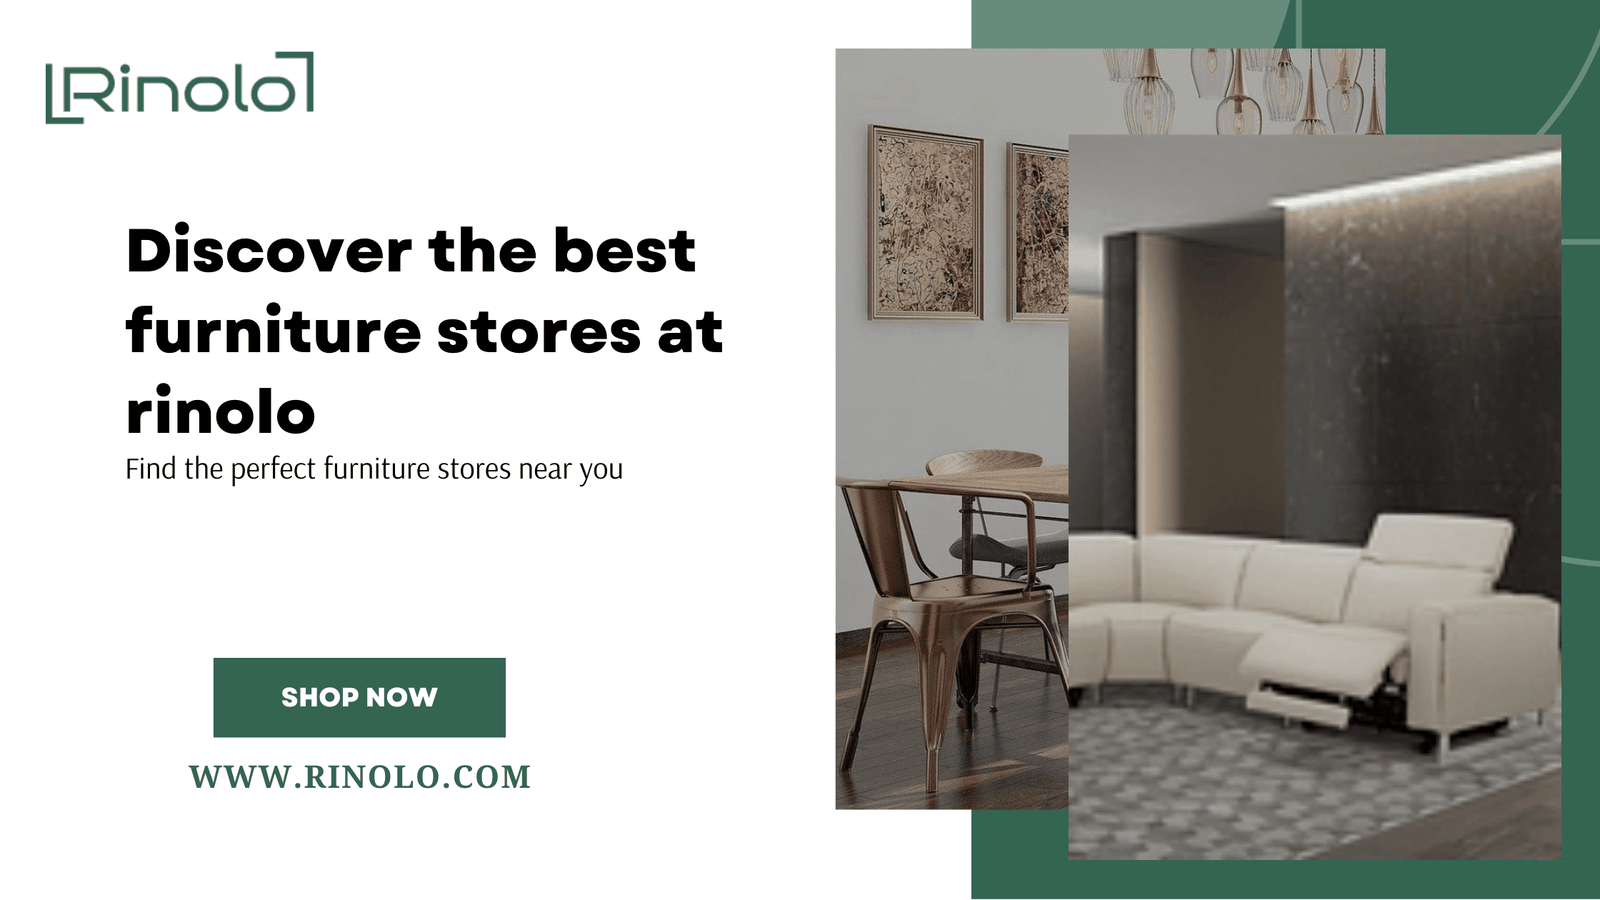 Discover the Best online furniture stores in Rinolo